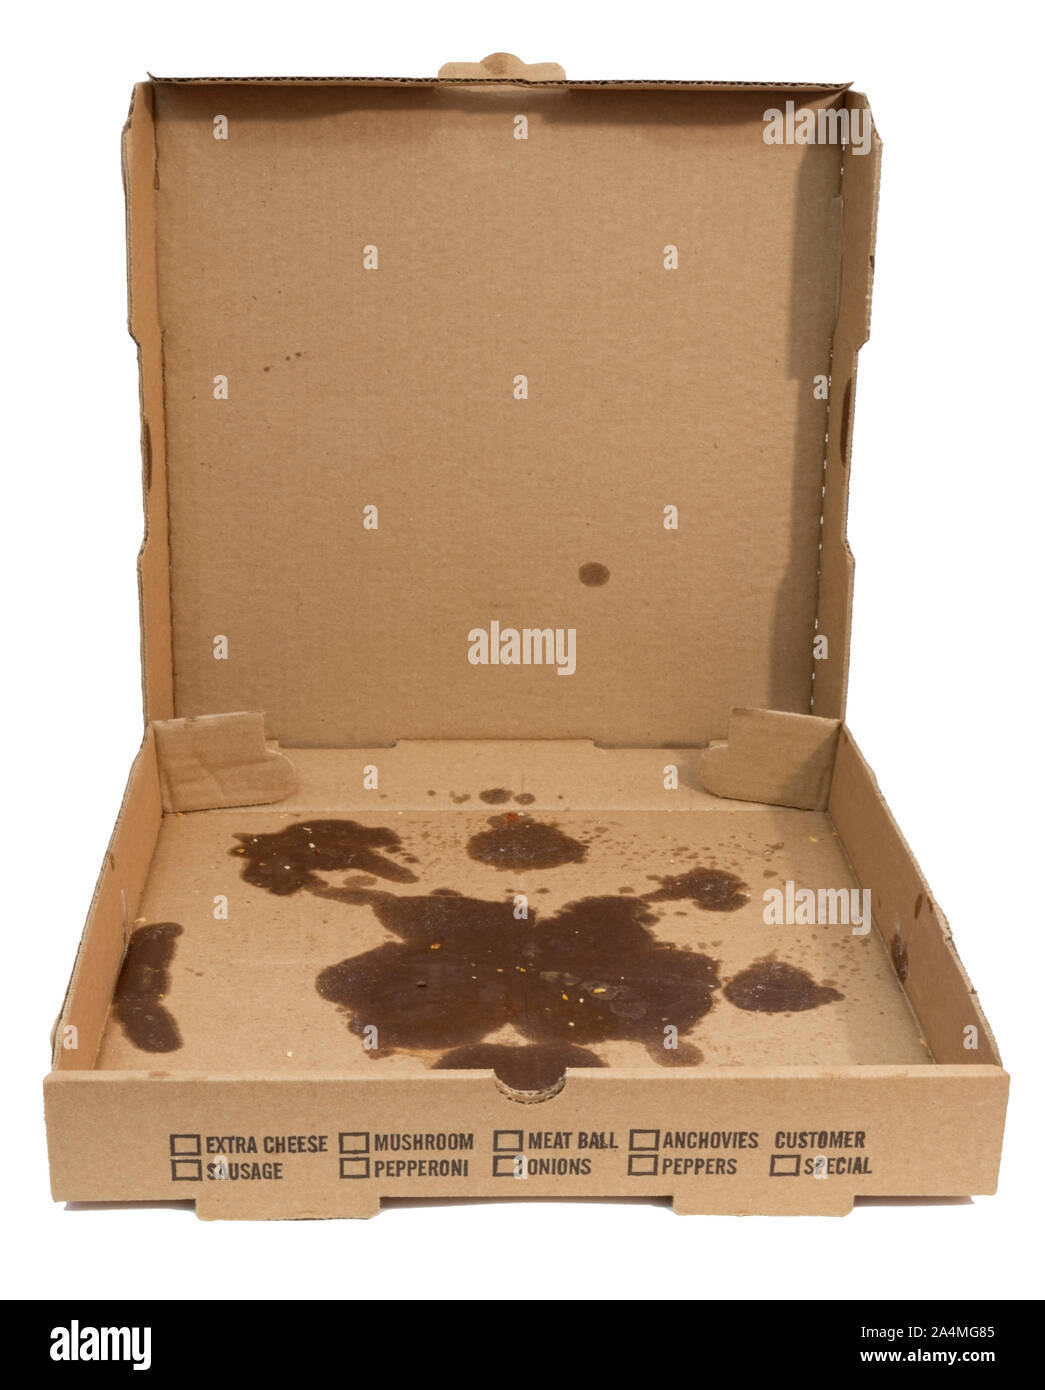 Empty greasy pizza box with lid open. Isolated. Stock Photo